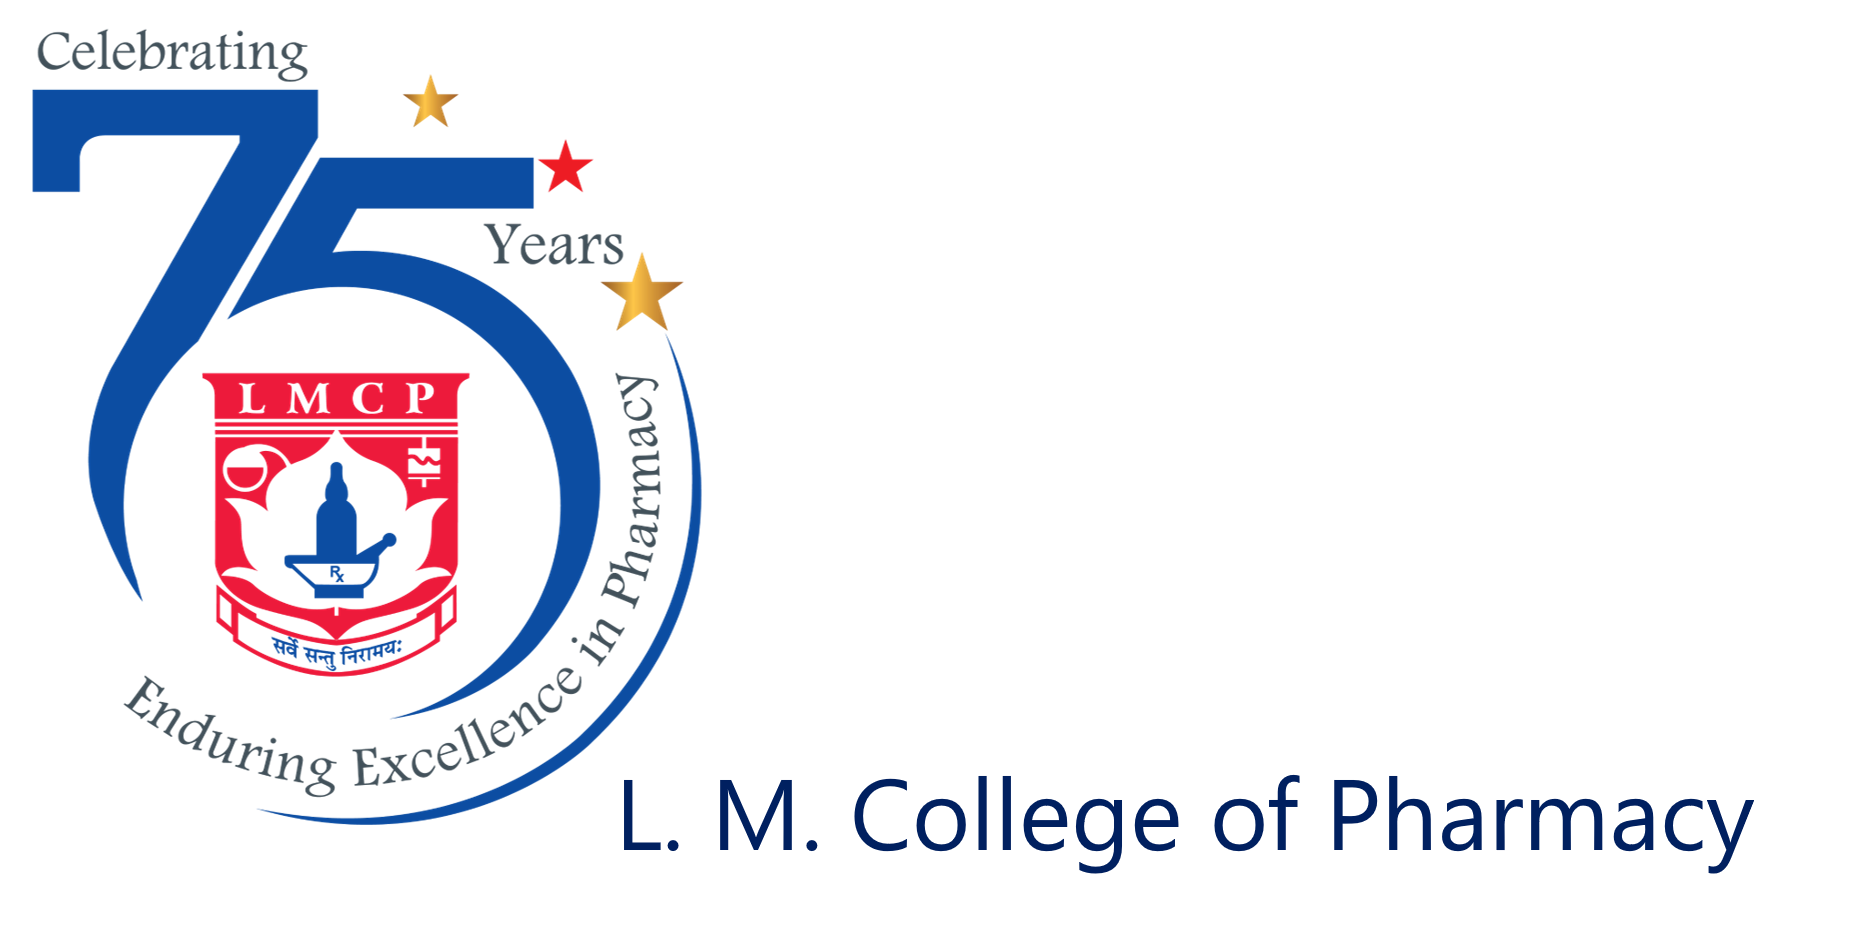 L. M. College of Pharmacy